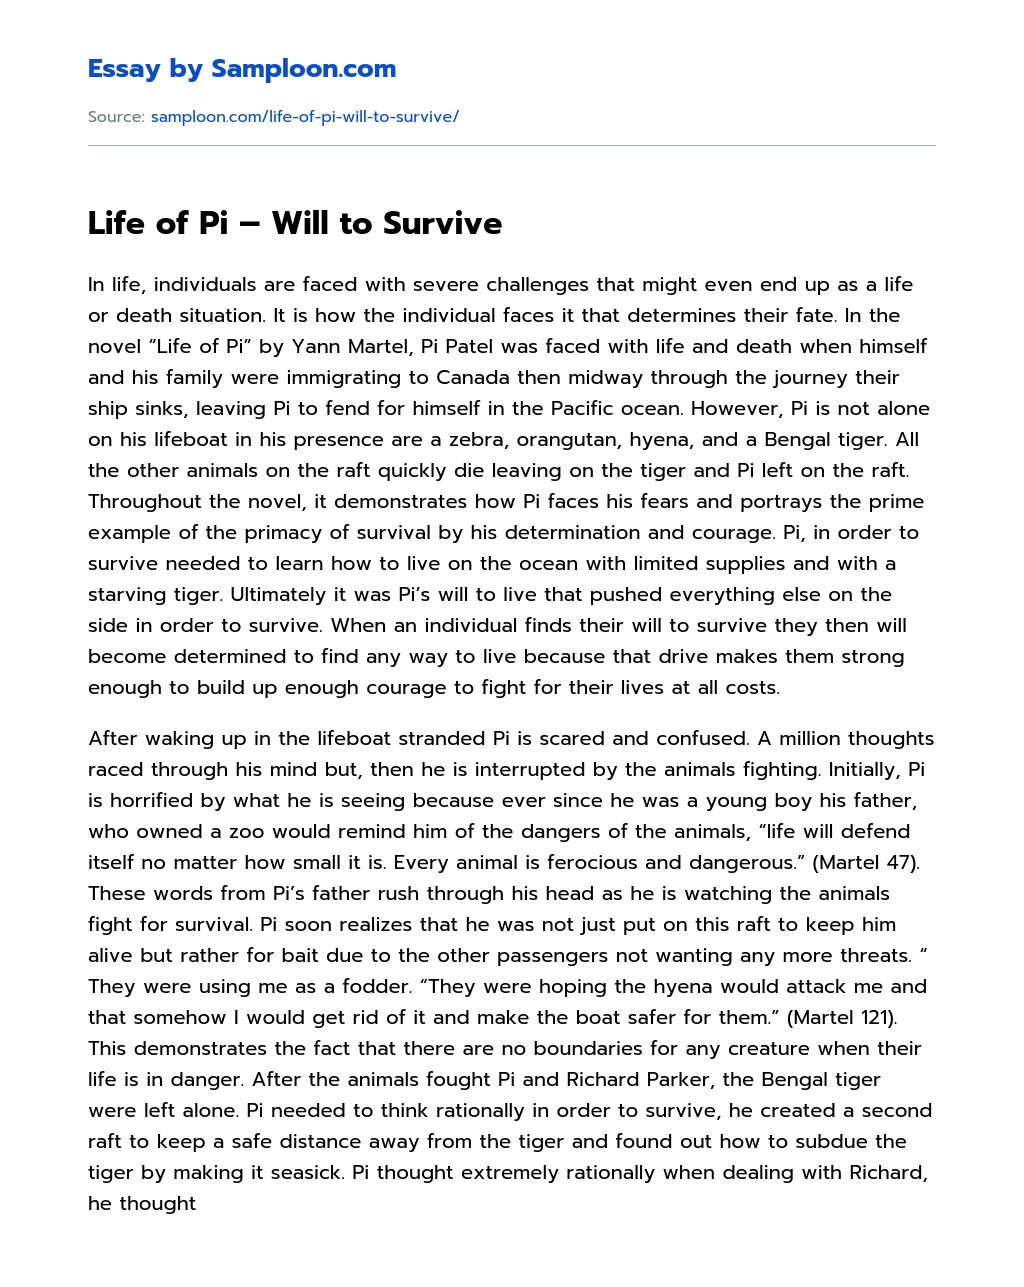 Life of Pi – Will to Survive Literary Analysis essay